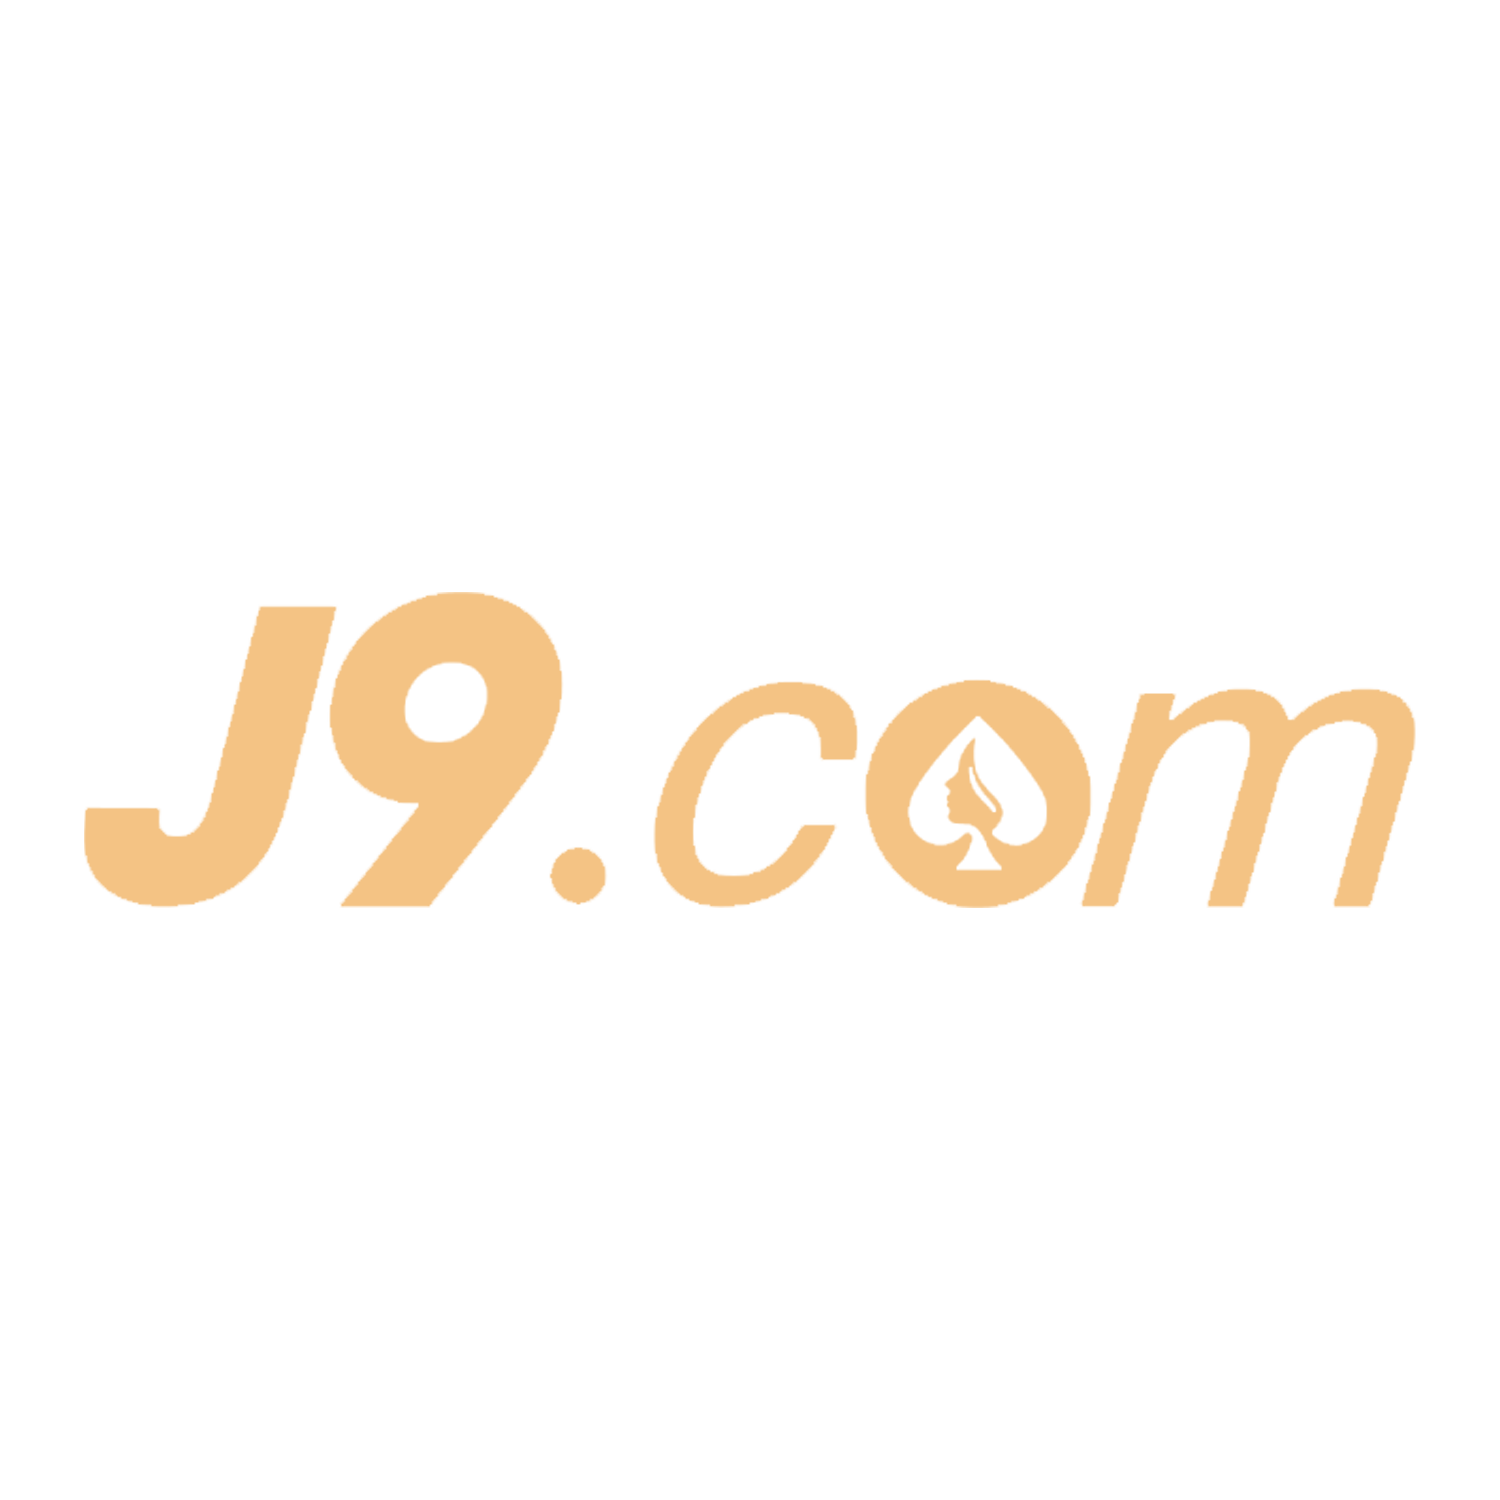 J9.com offers many options for sports betting.